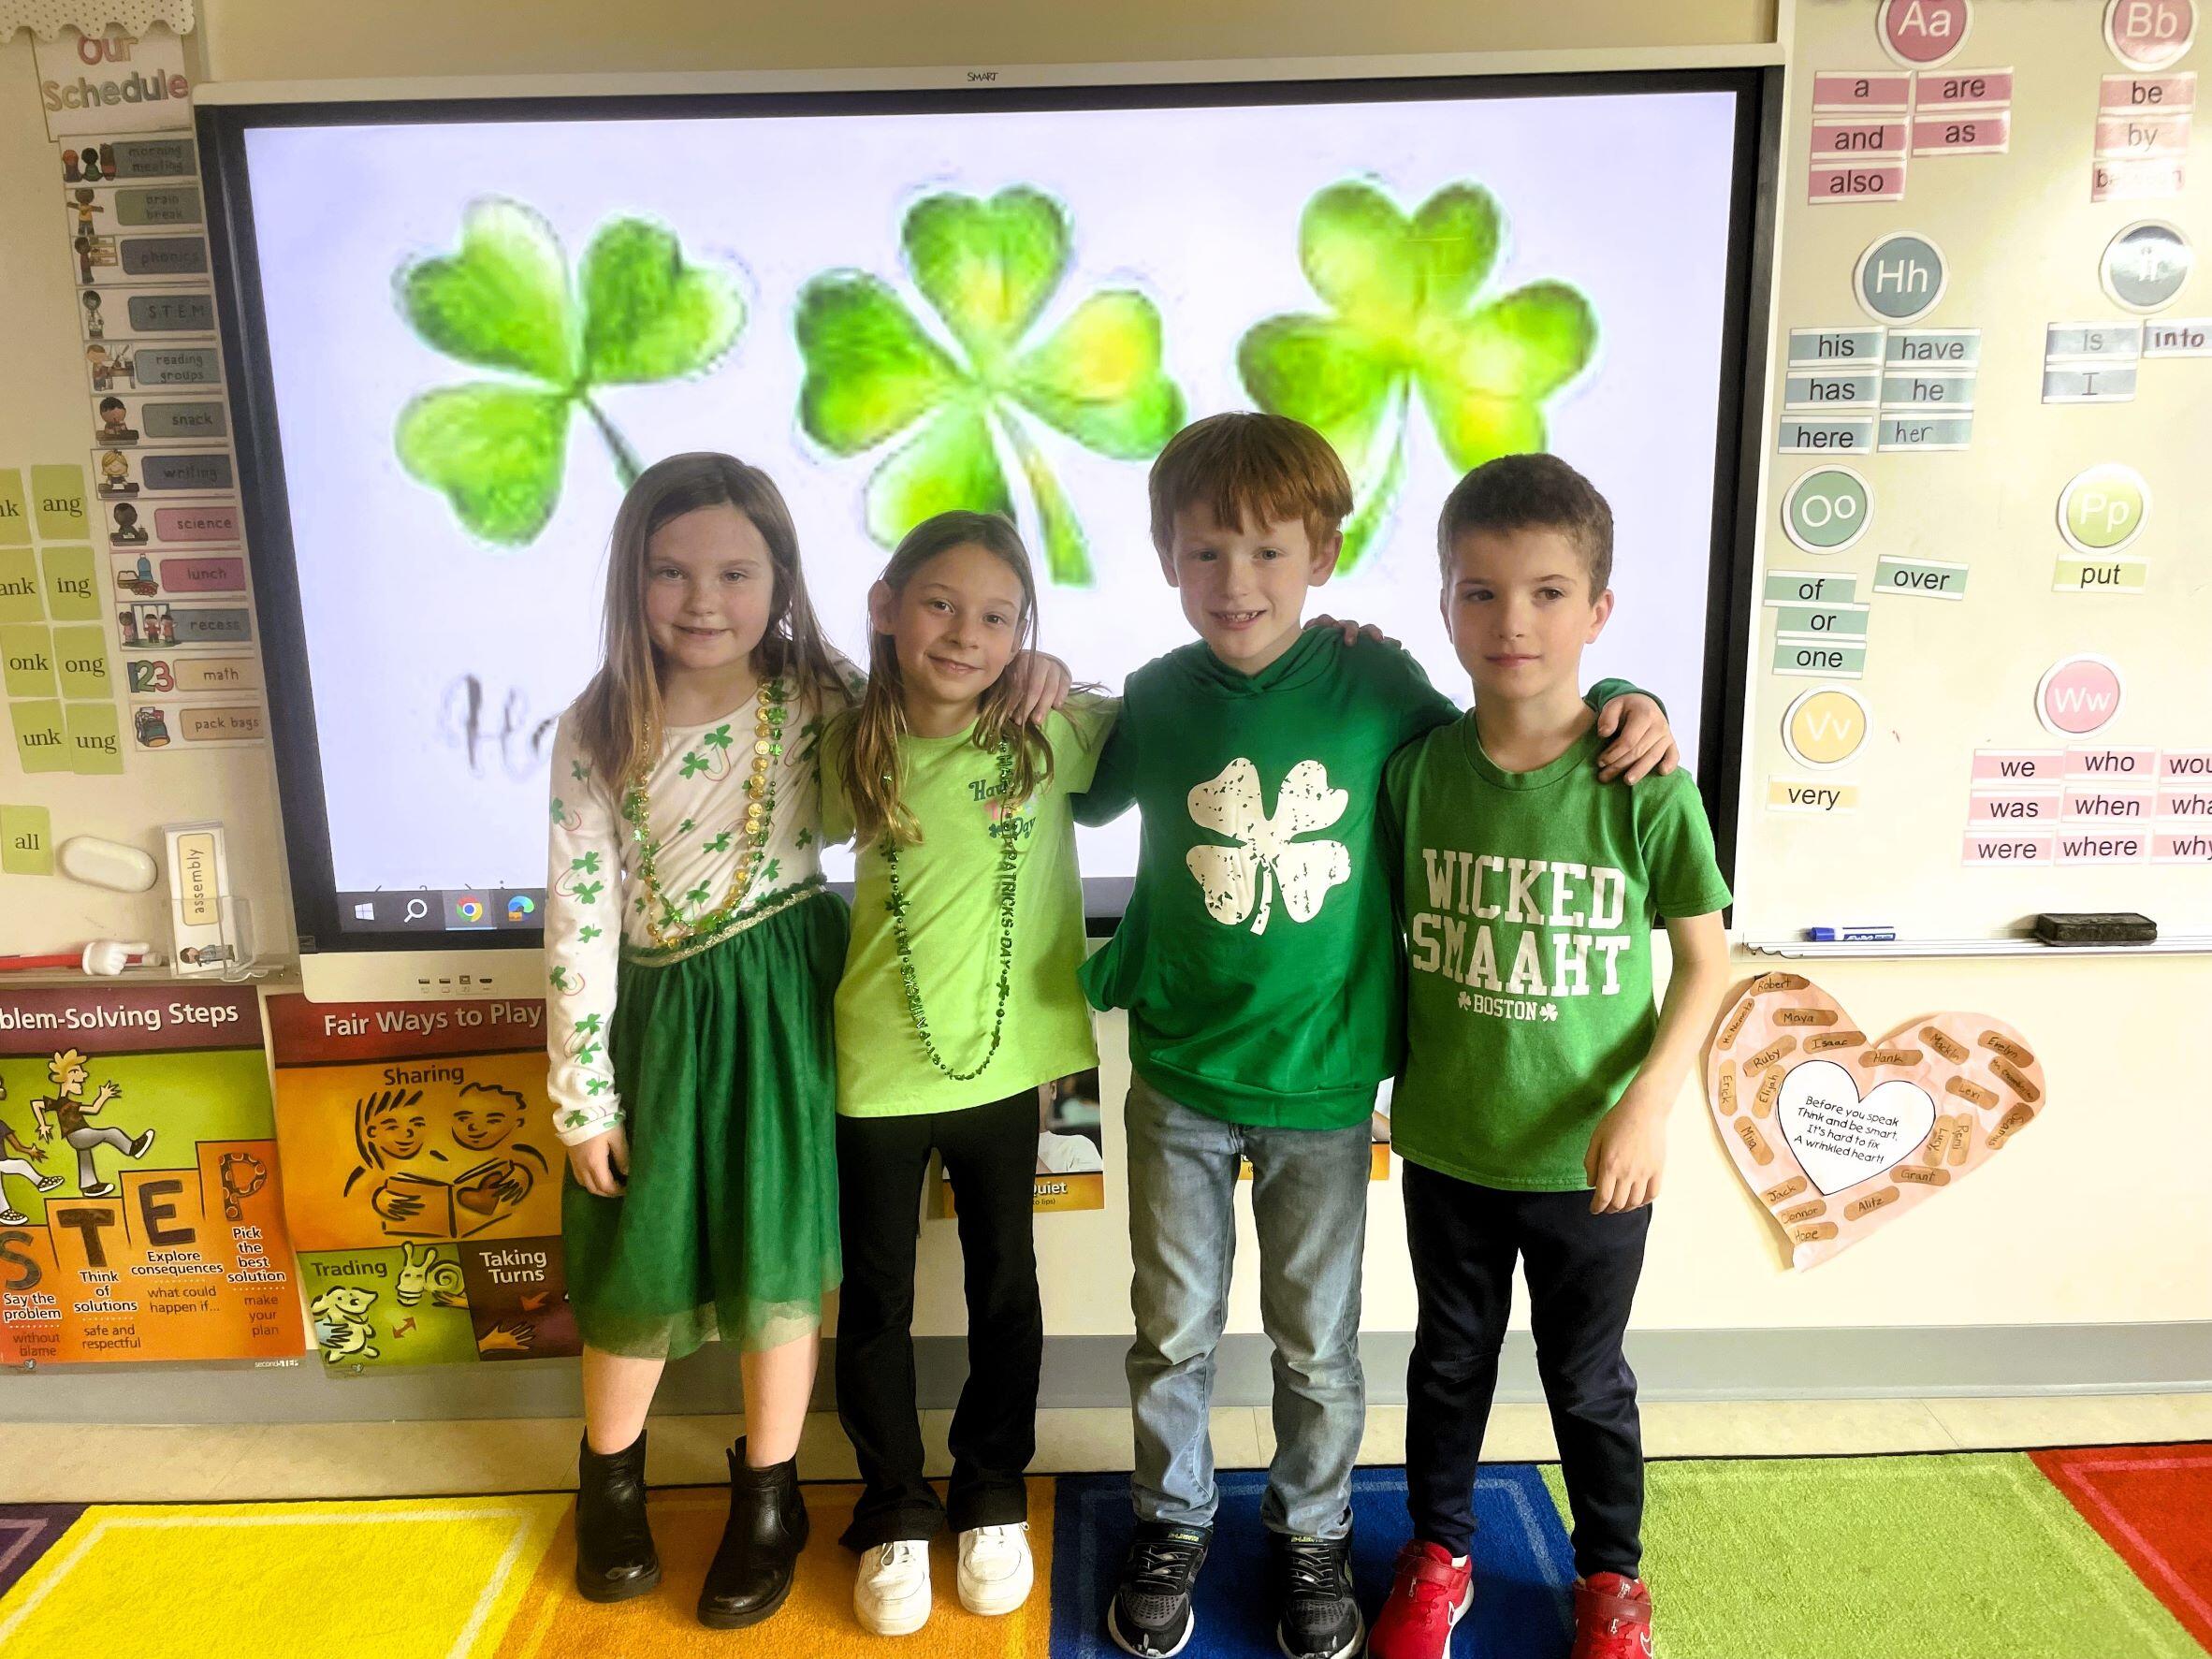 Enf-  Four students wearing green, standing in front of a smartboard. On the smartboard are shamrocks